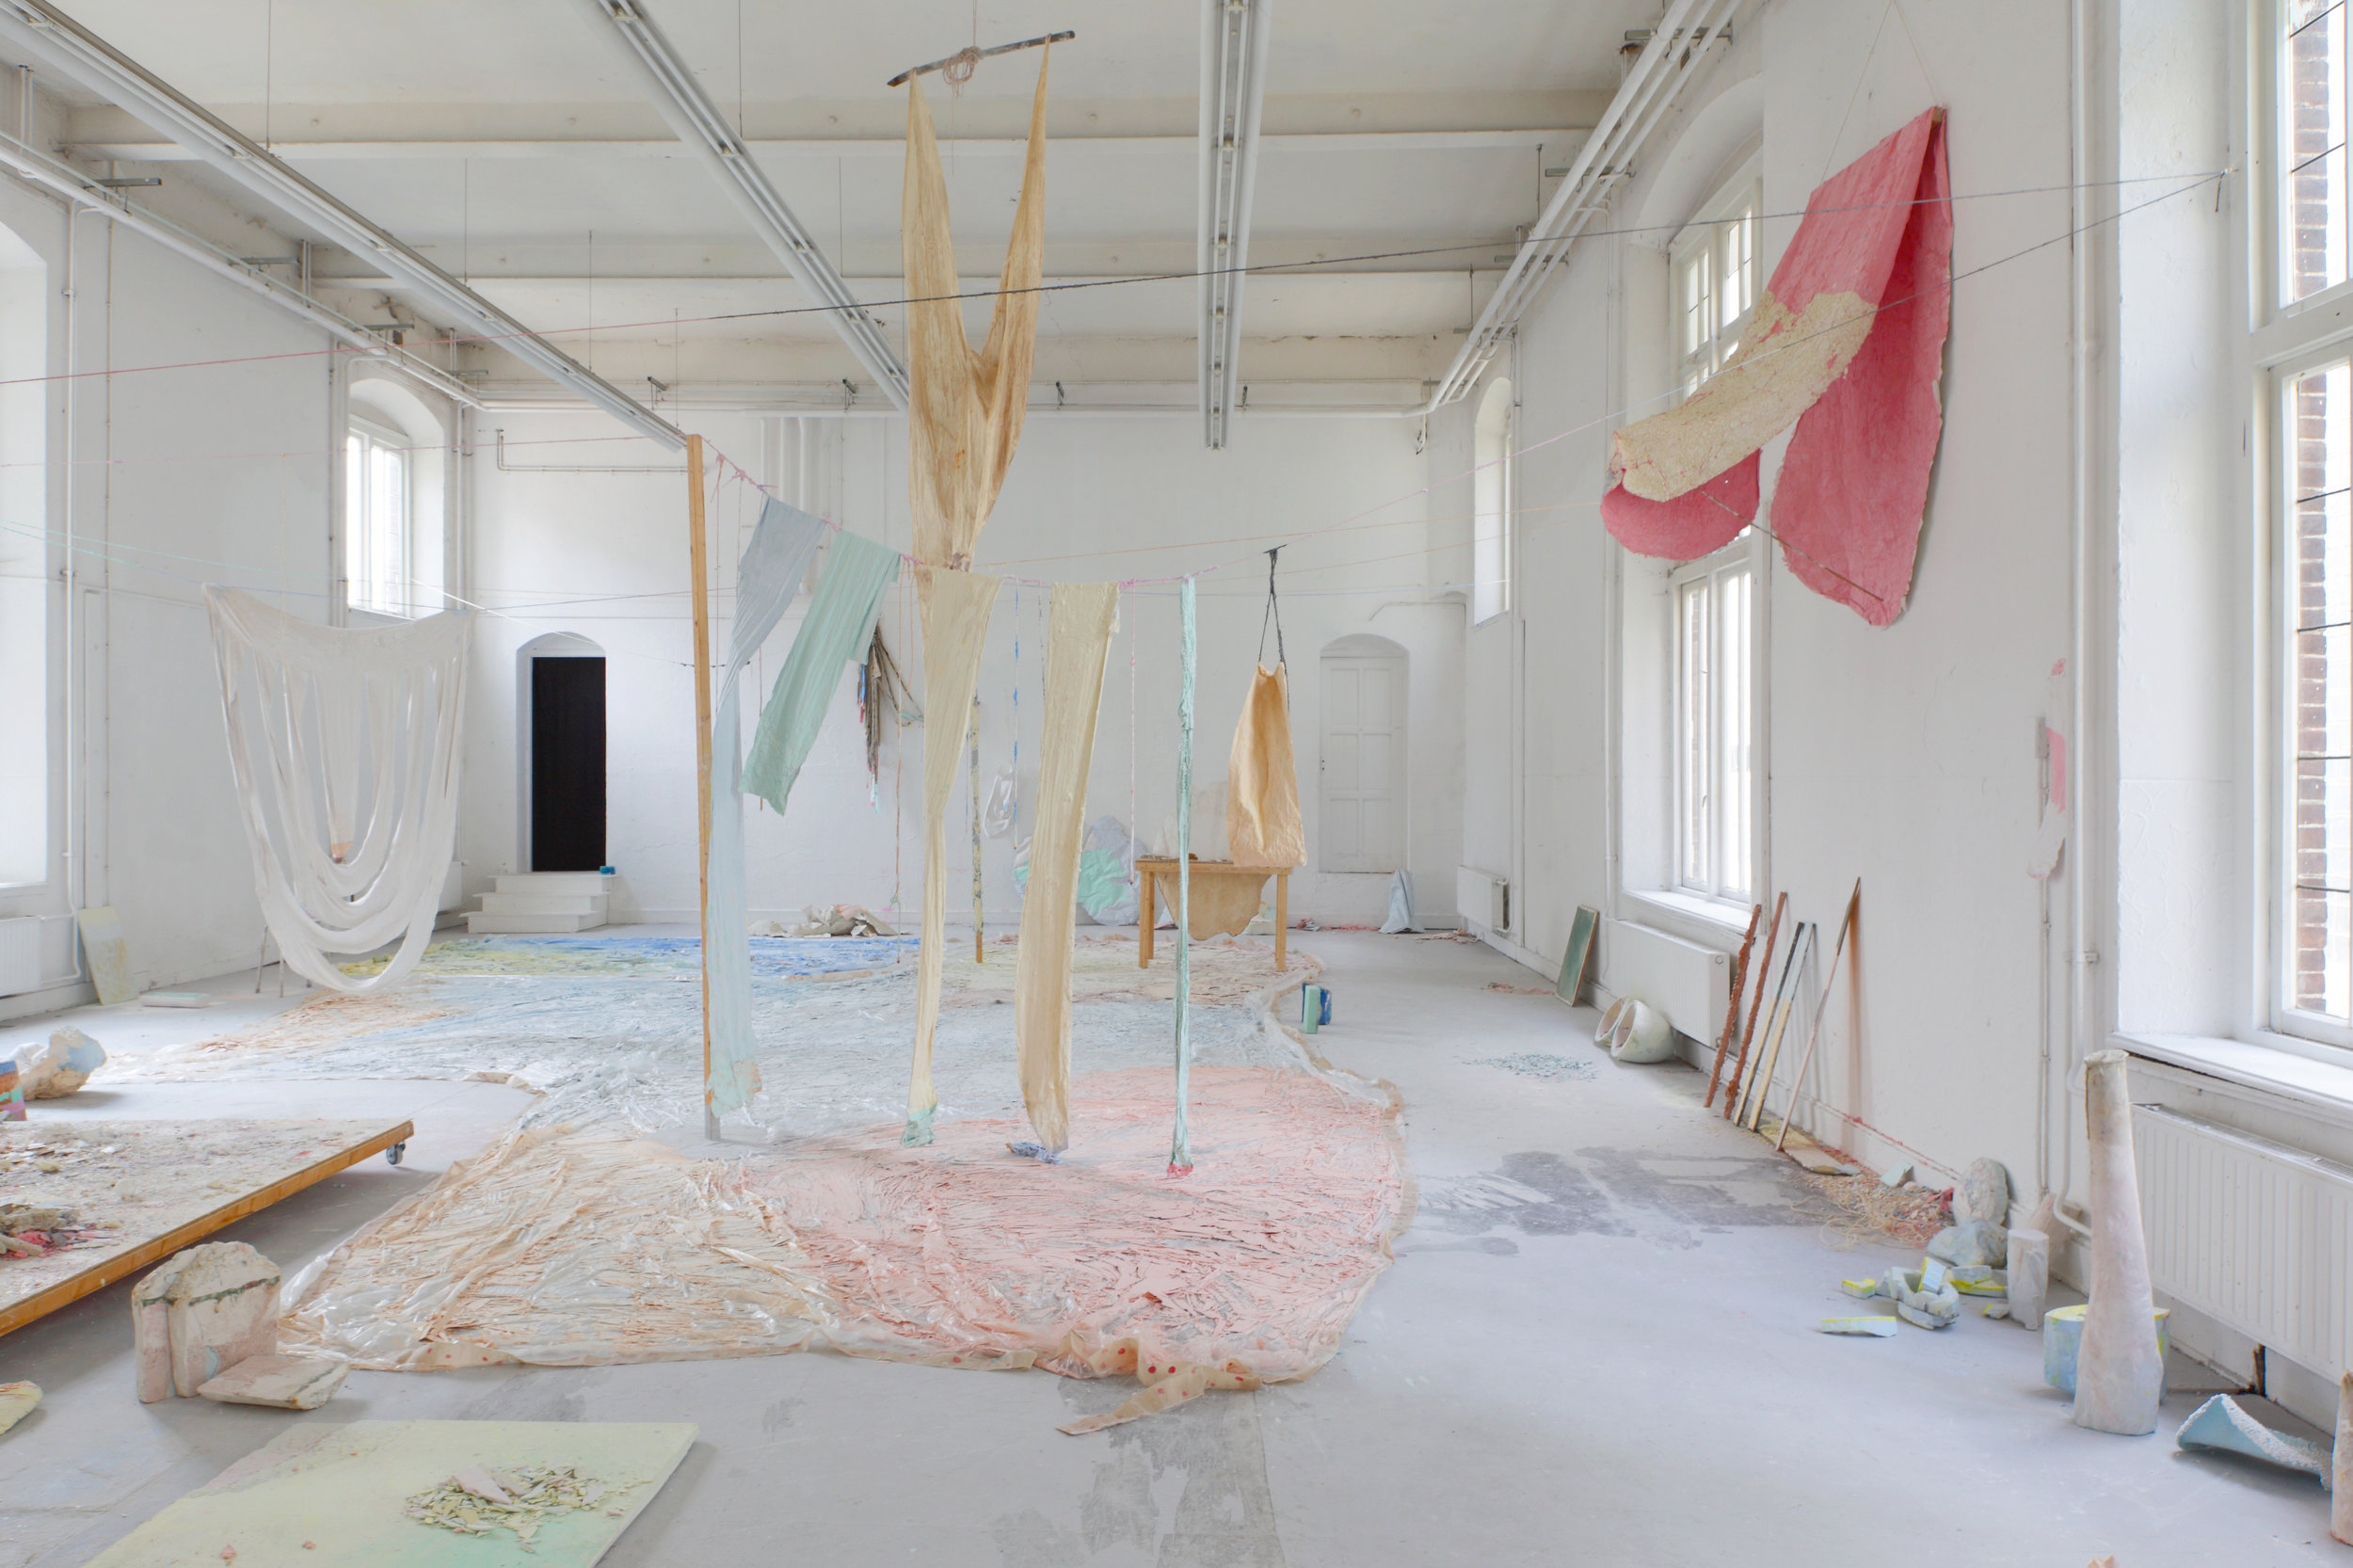 Some things that still need to be said (also about how candy is made) - Colored chalk, textiles, wax, plastics, various paints, wood, 2400 x 1100 cm, graduation show MAFAD Maastricht, 2014